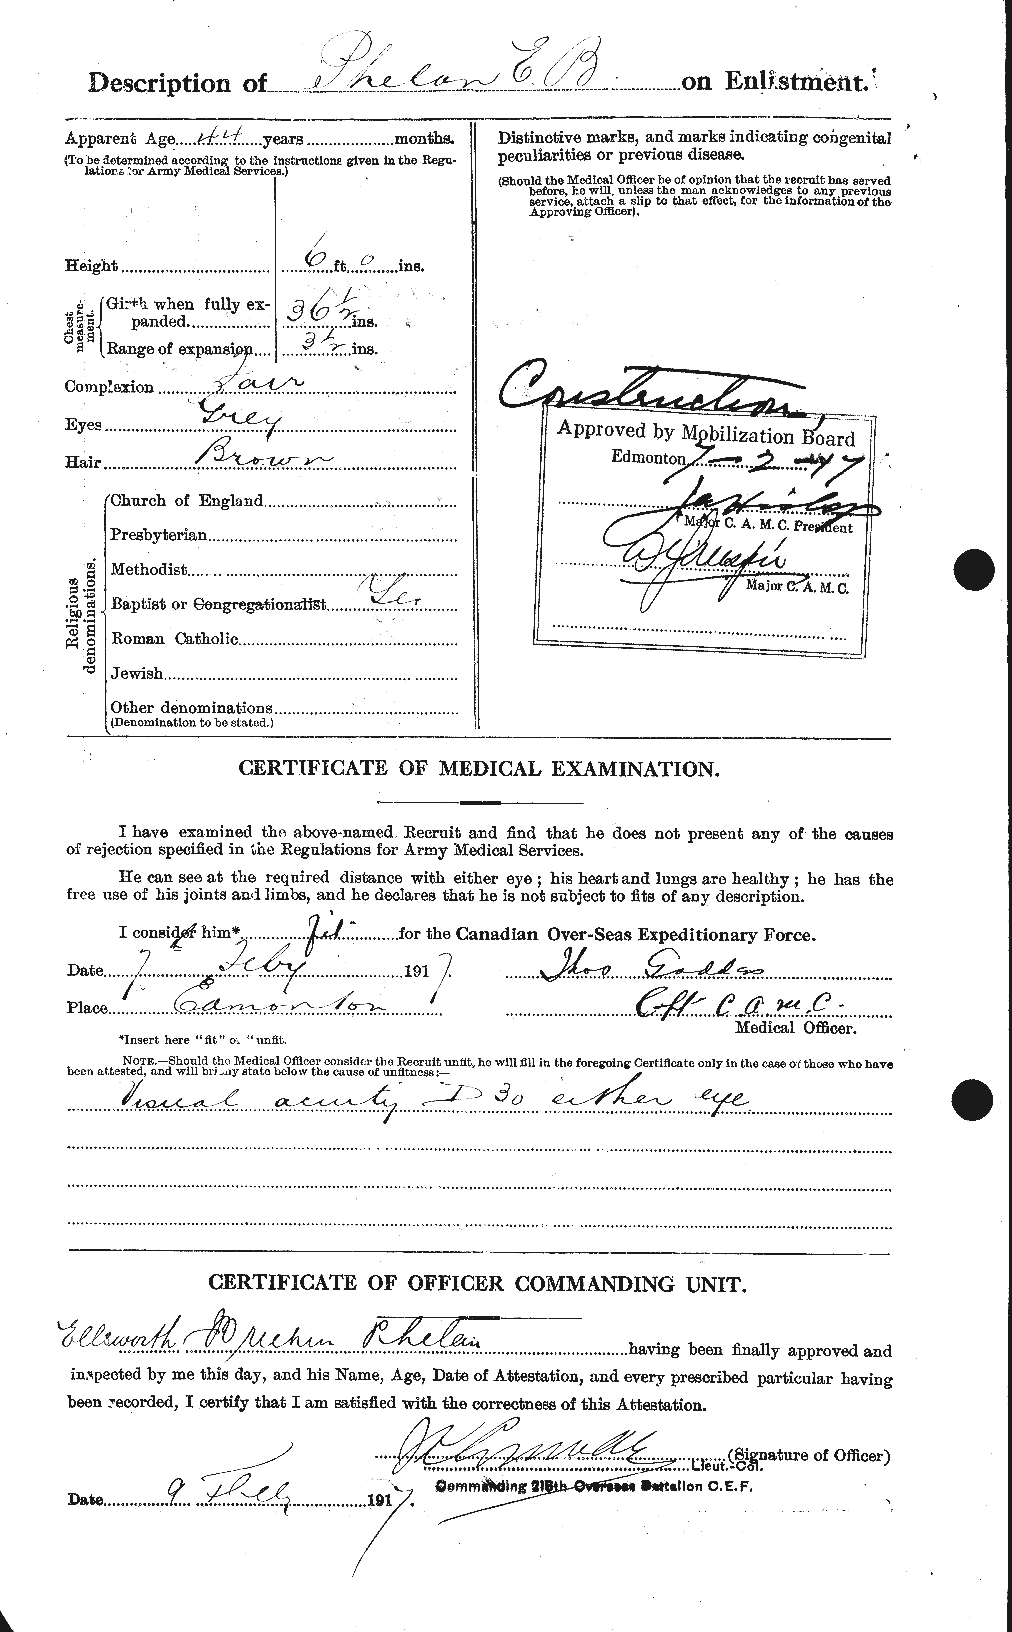 Personnel Records of the First World War - CEF 576943b